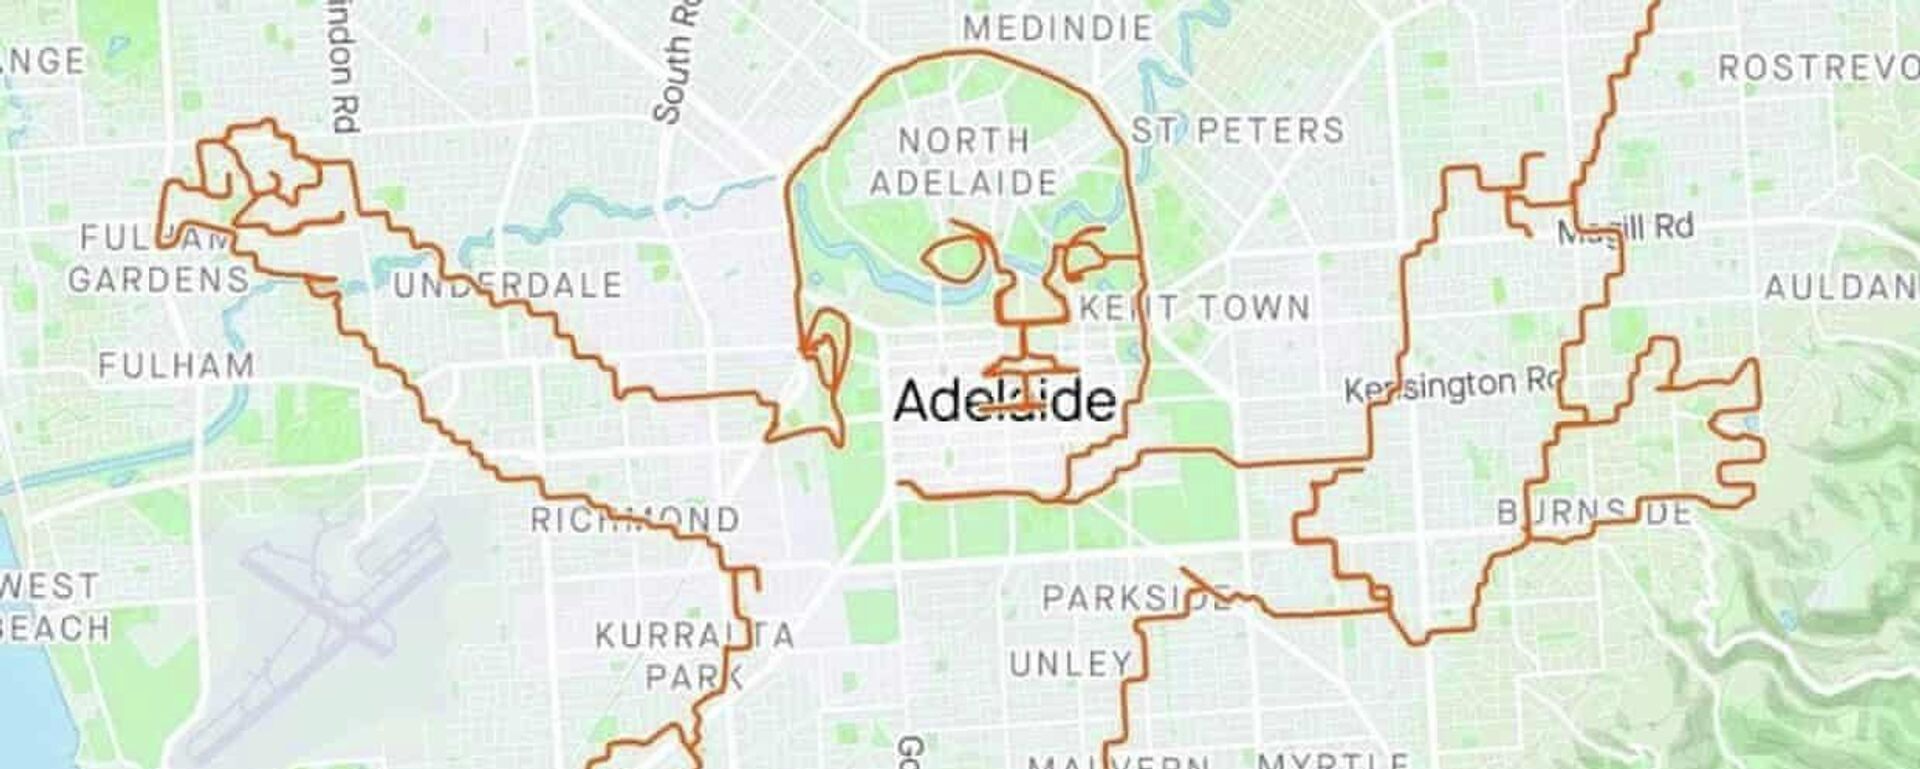 Cyclist Pete Stokes draws a baby from Nirvana's Nevermind album cover by tracking his movements around the town of Adelaide, Australia on the 30th anniversary of the album's release in 2021. - Sputnik International, 1920, 26.09.2021